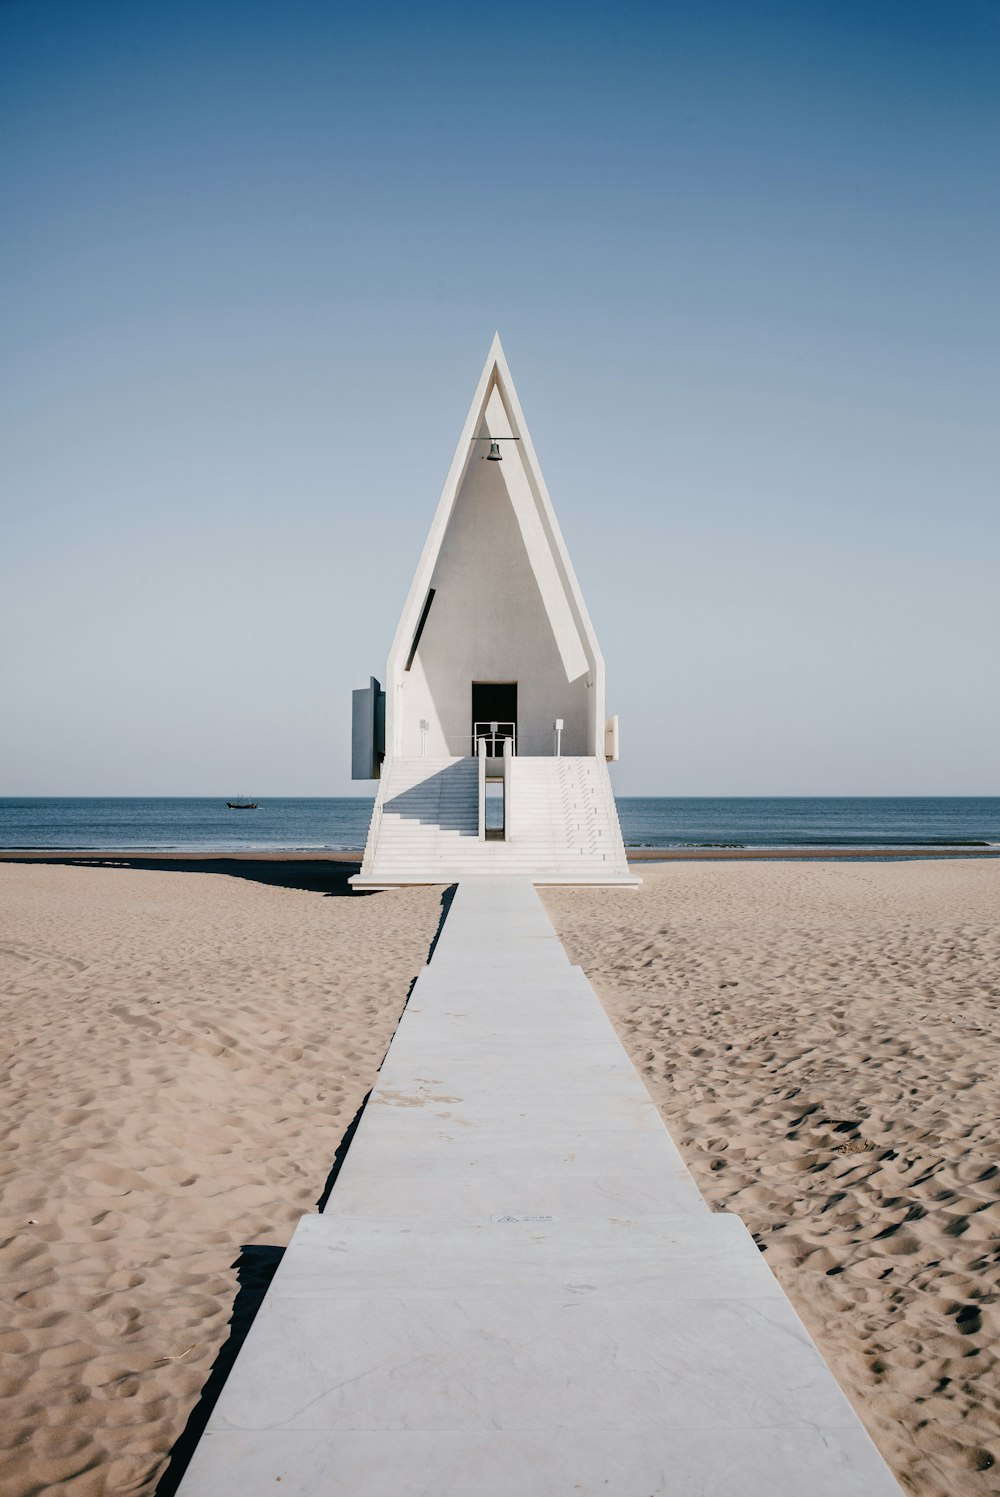 a walkway leading to a white triangular structure on a beach